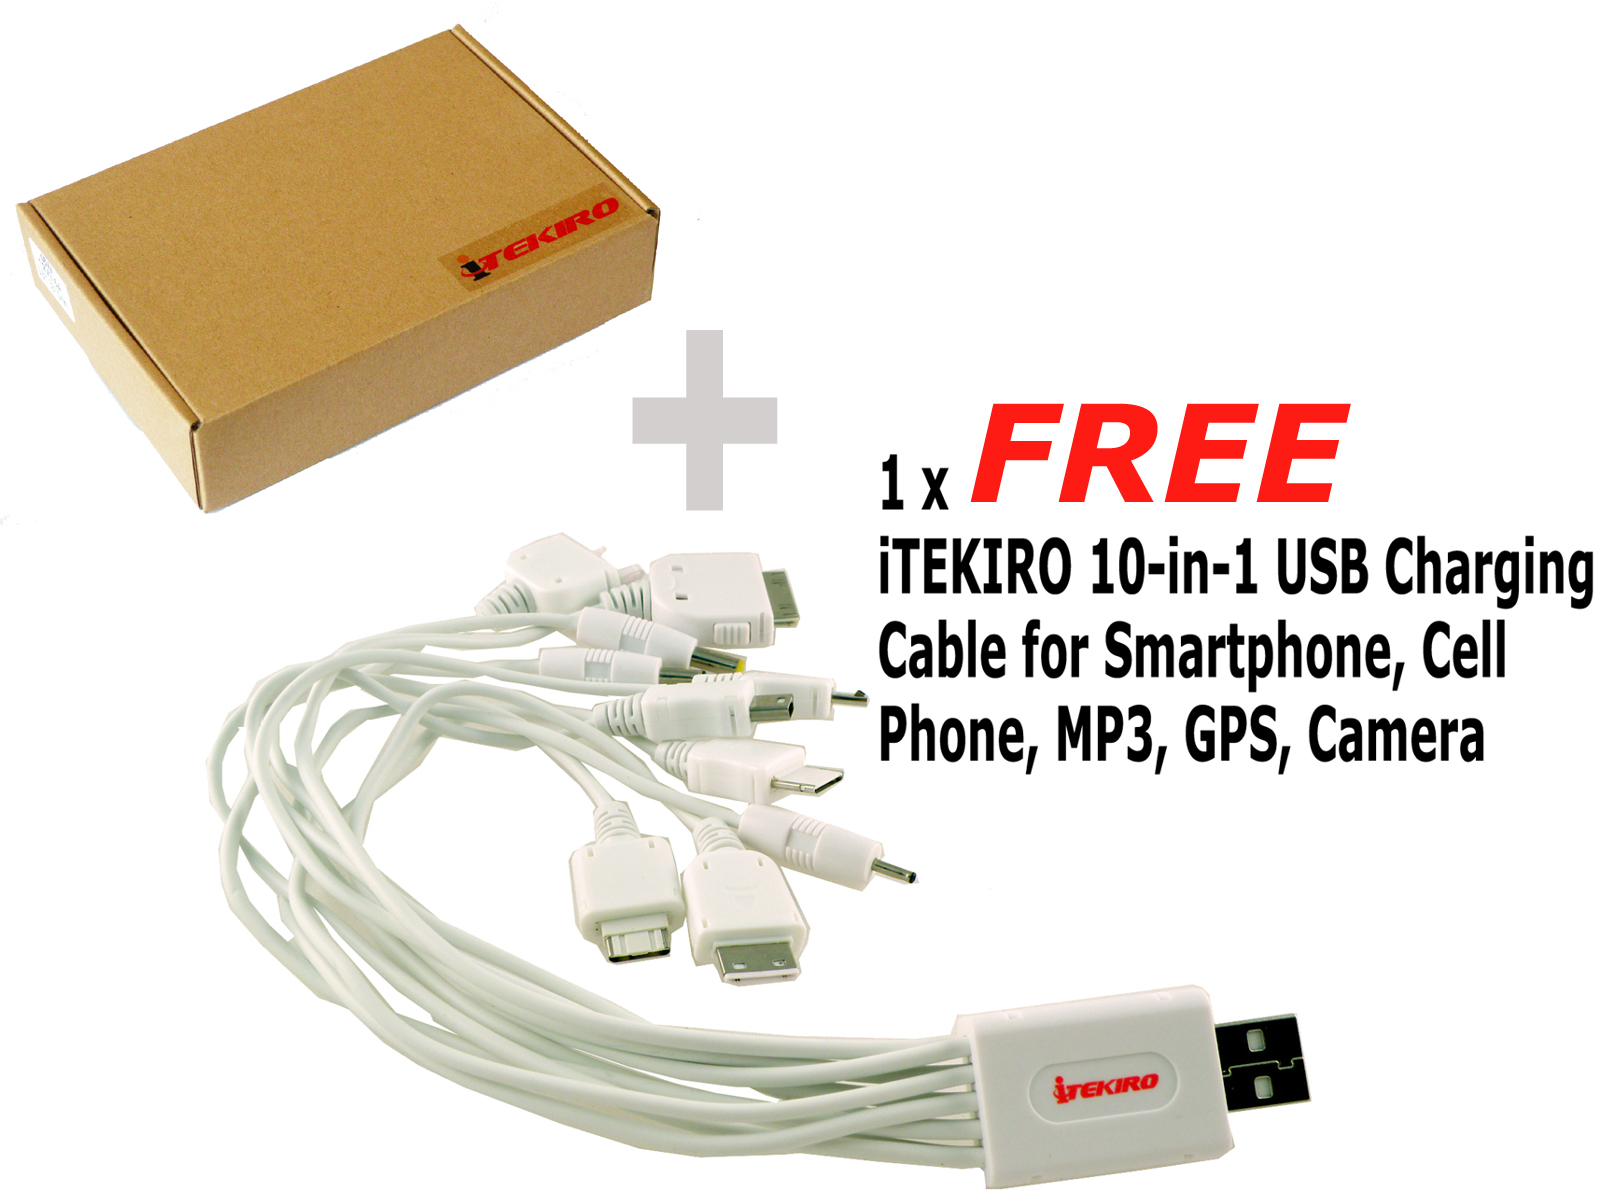 iTEKIRO 5V 3A Charger for Samsung Galaxy Tab S2; Galaxy Tab S2 8.0 SM-T710; Galaxy Tab S2 9.7 SM-T810, Galaxy Tab S2 9.7 SM-T817V; Galaxy Tab S3; Galaxy Tab S4; Galaxy Tab S5 (6.5 Ft Cord) - image 5 of 5